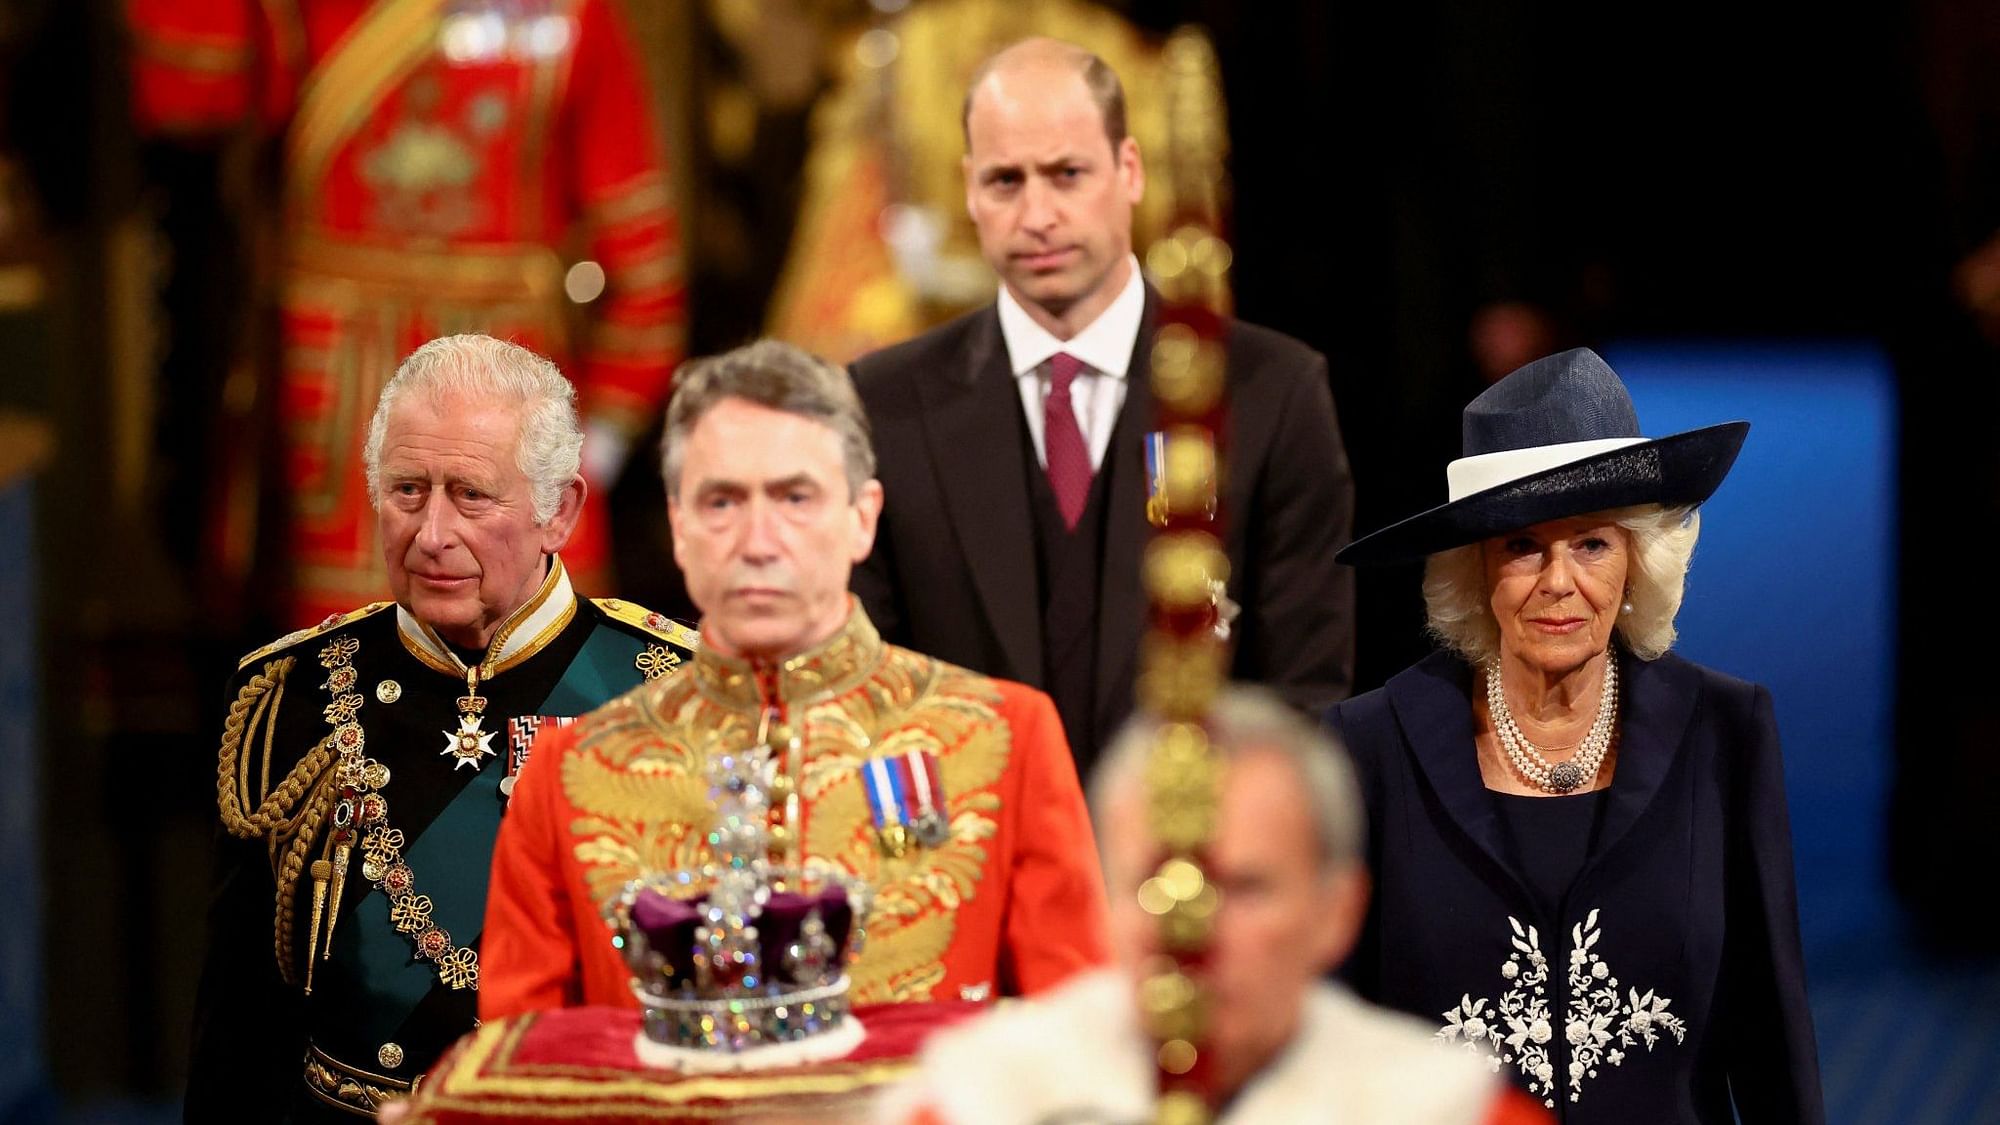 <div class="paragraphs"><p>For the first time, Prince Charles on Tuesday, 10 May, gave the Queen's speech at the Britain parliament's ceremonial opening. Queen Elizabeth had reportedly missed the grand event for the first time in six decades</p></div>